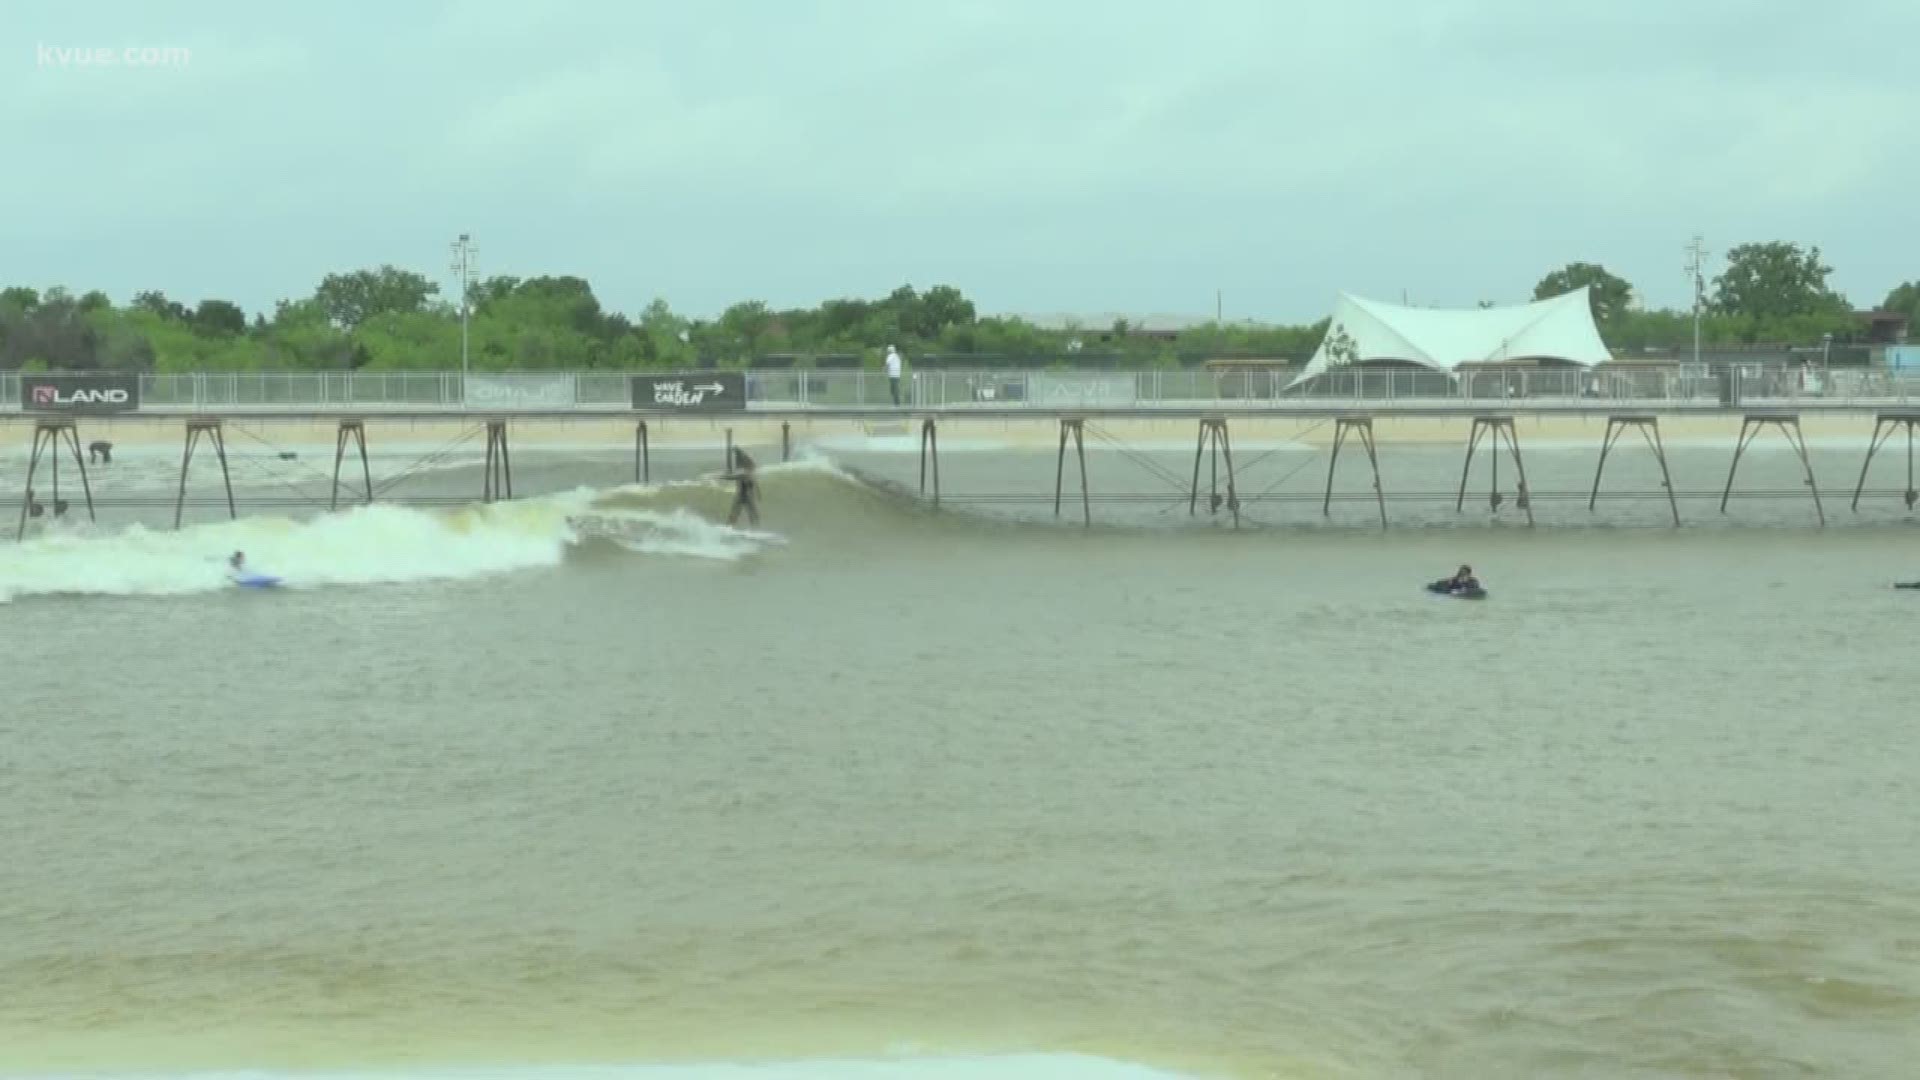 Some of the morning crew tried hitting the waves at Central Texas' own surf park.